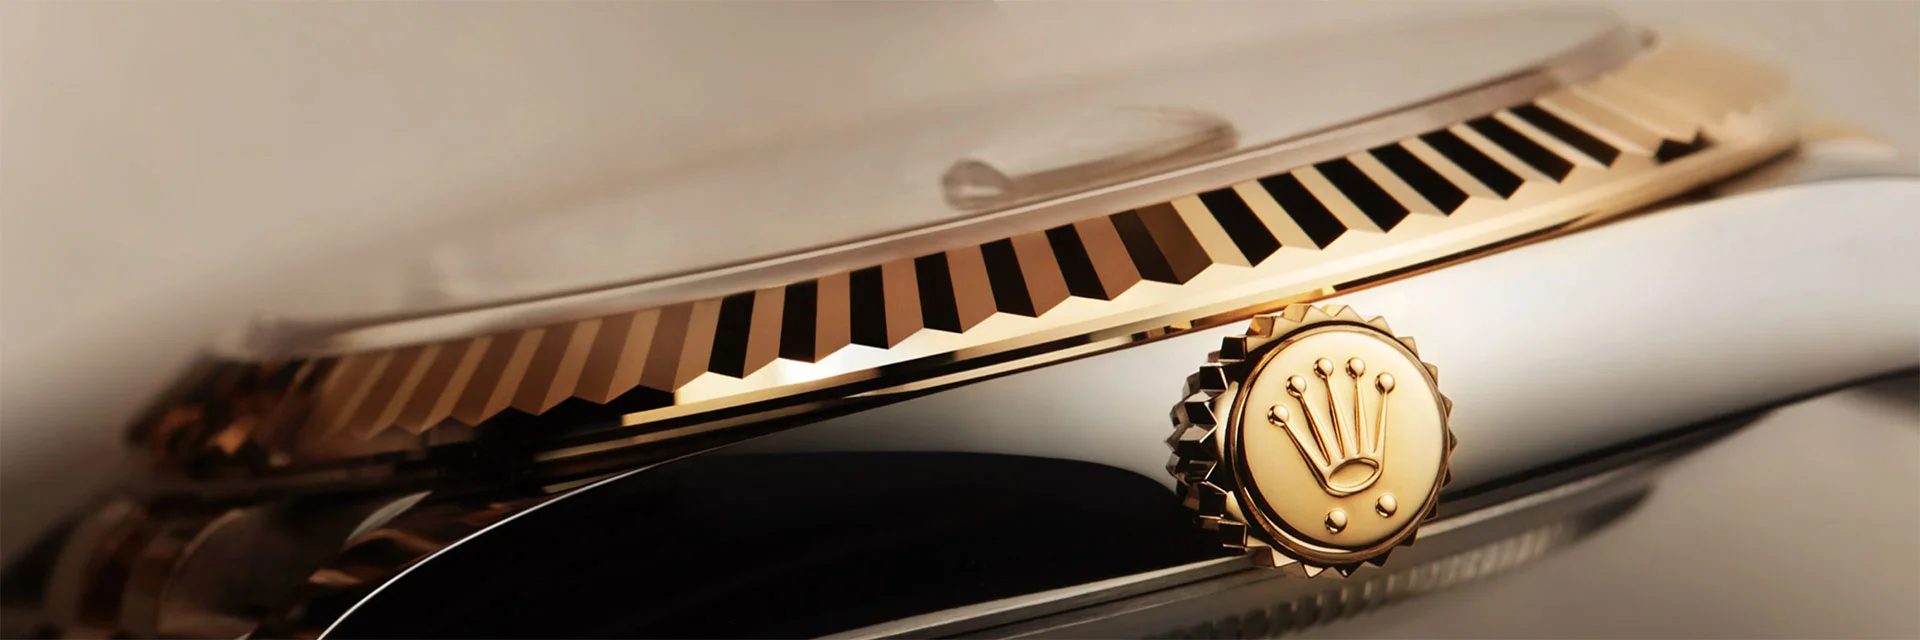 Discover the Rolex collections